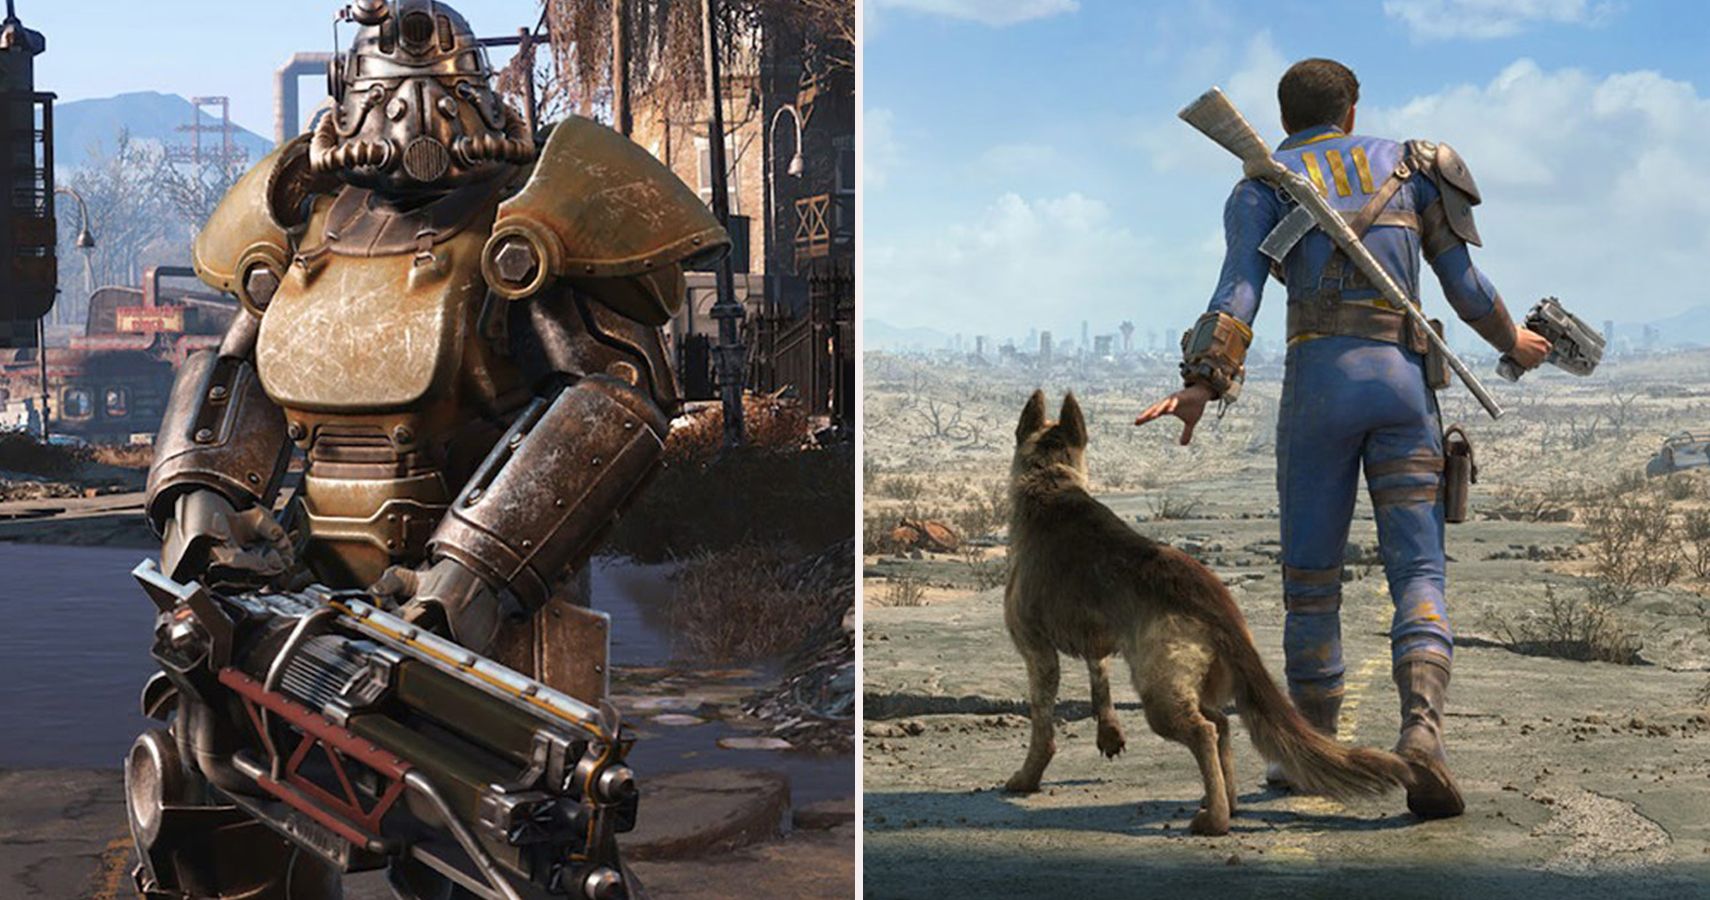 The 10 Best Builds For Survival In Fallout 4 Ranked Thegamer